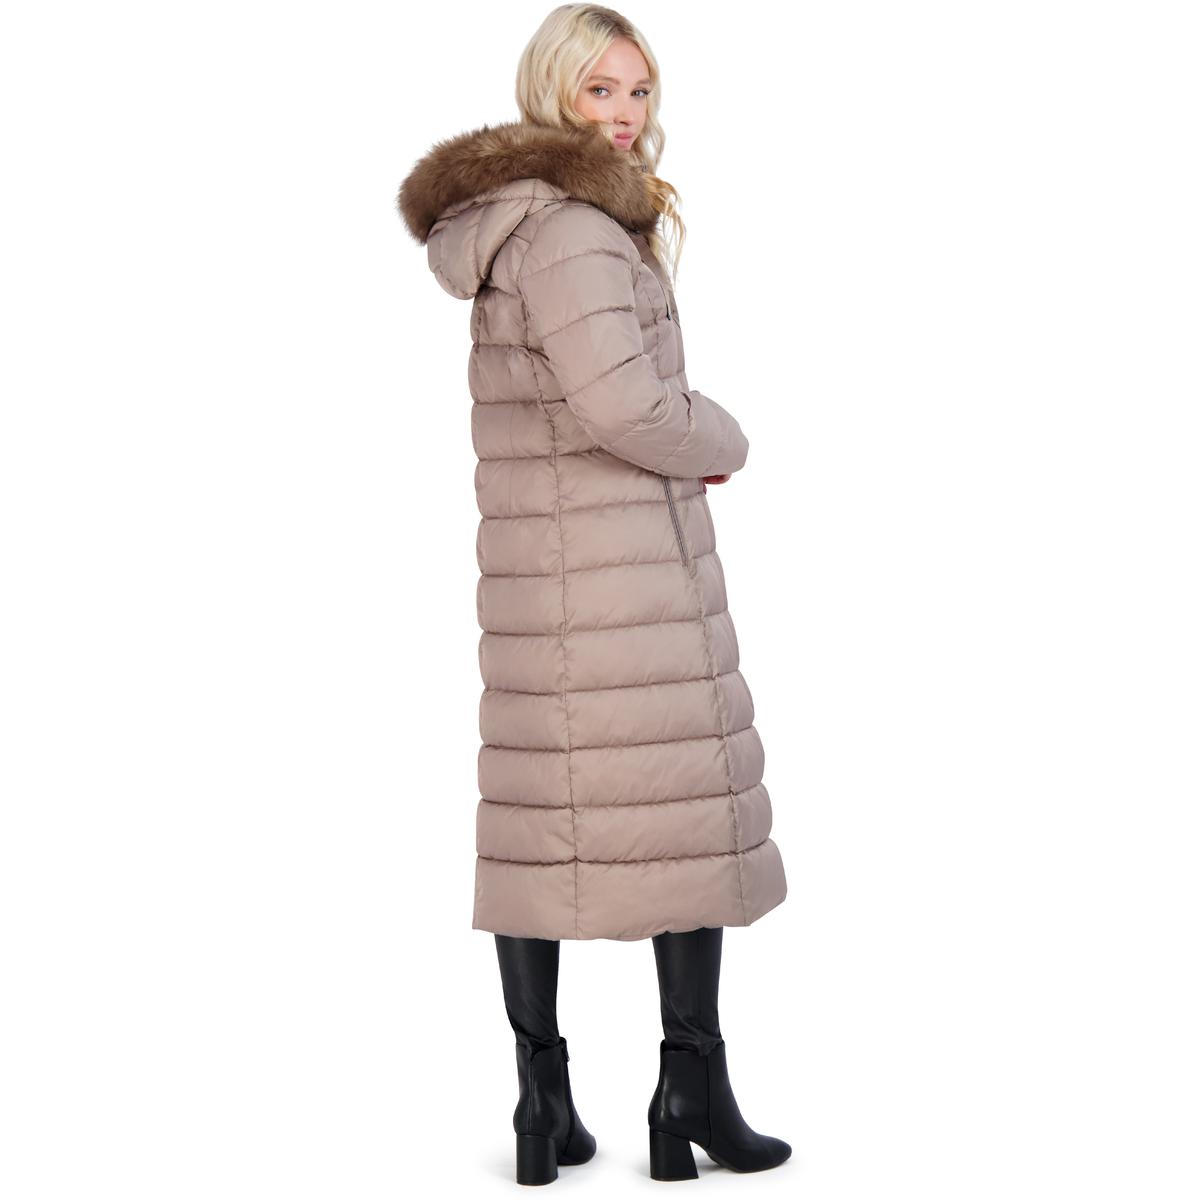 Tahari Nellie Long Coat for Women-Insulated Jacket with Removable Faux ...